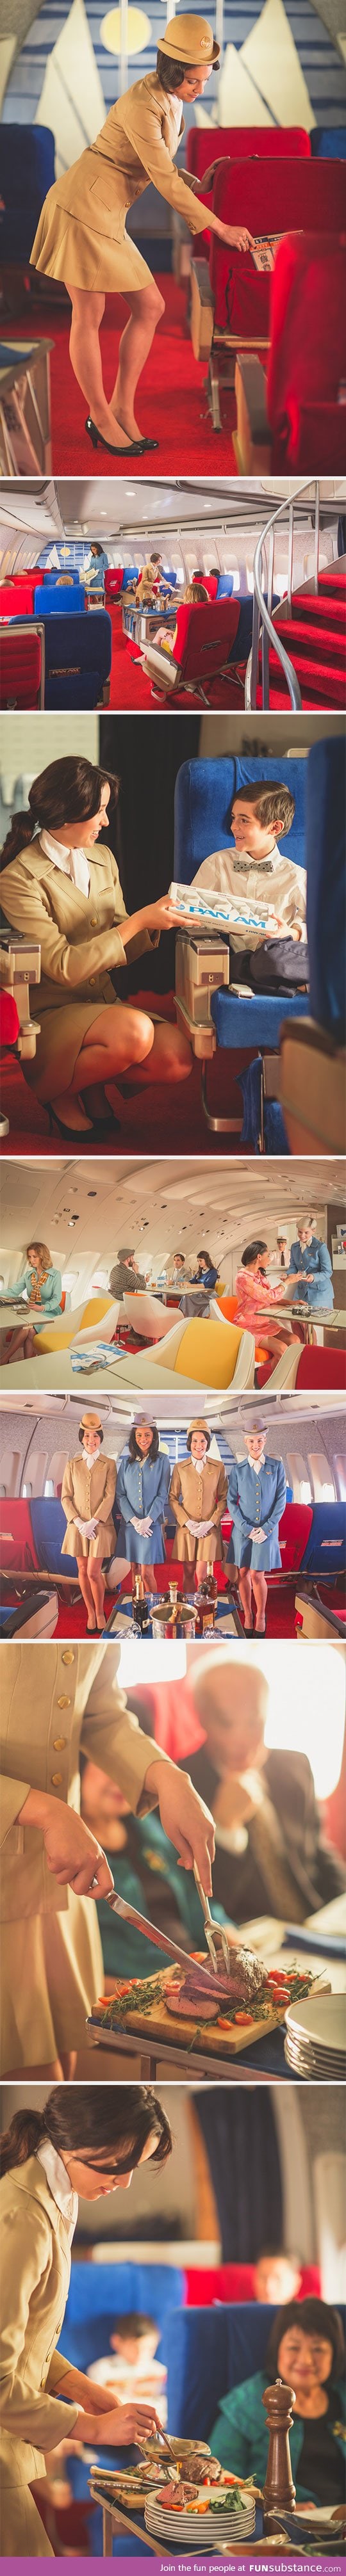 Pan Am In The 1960s